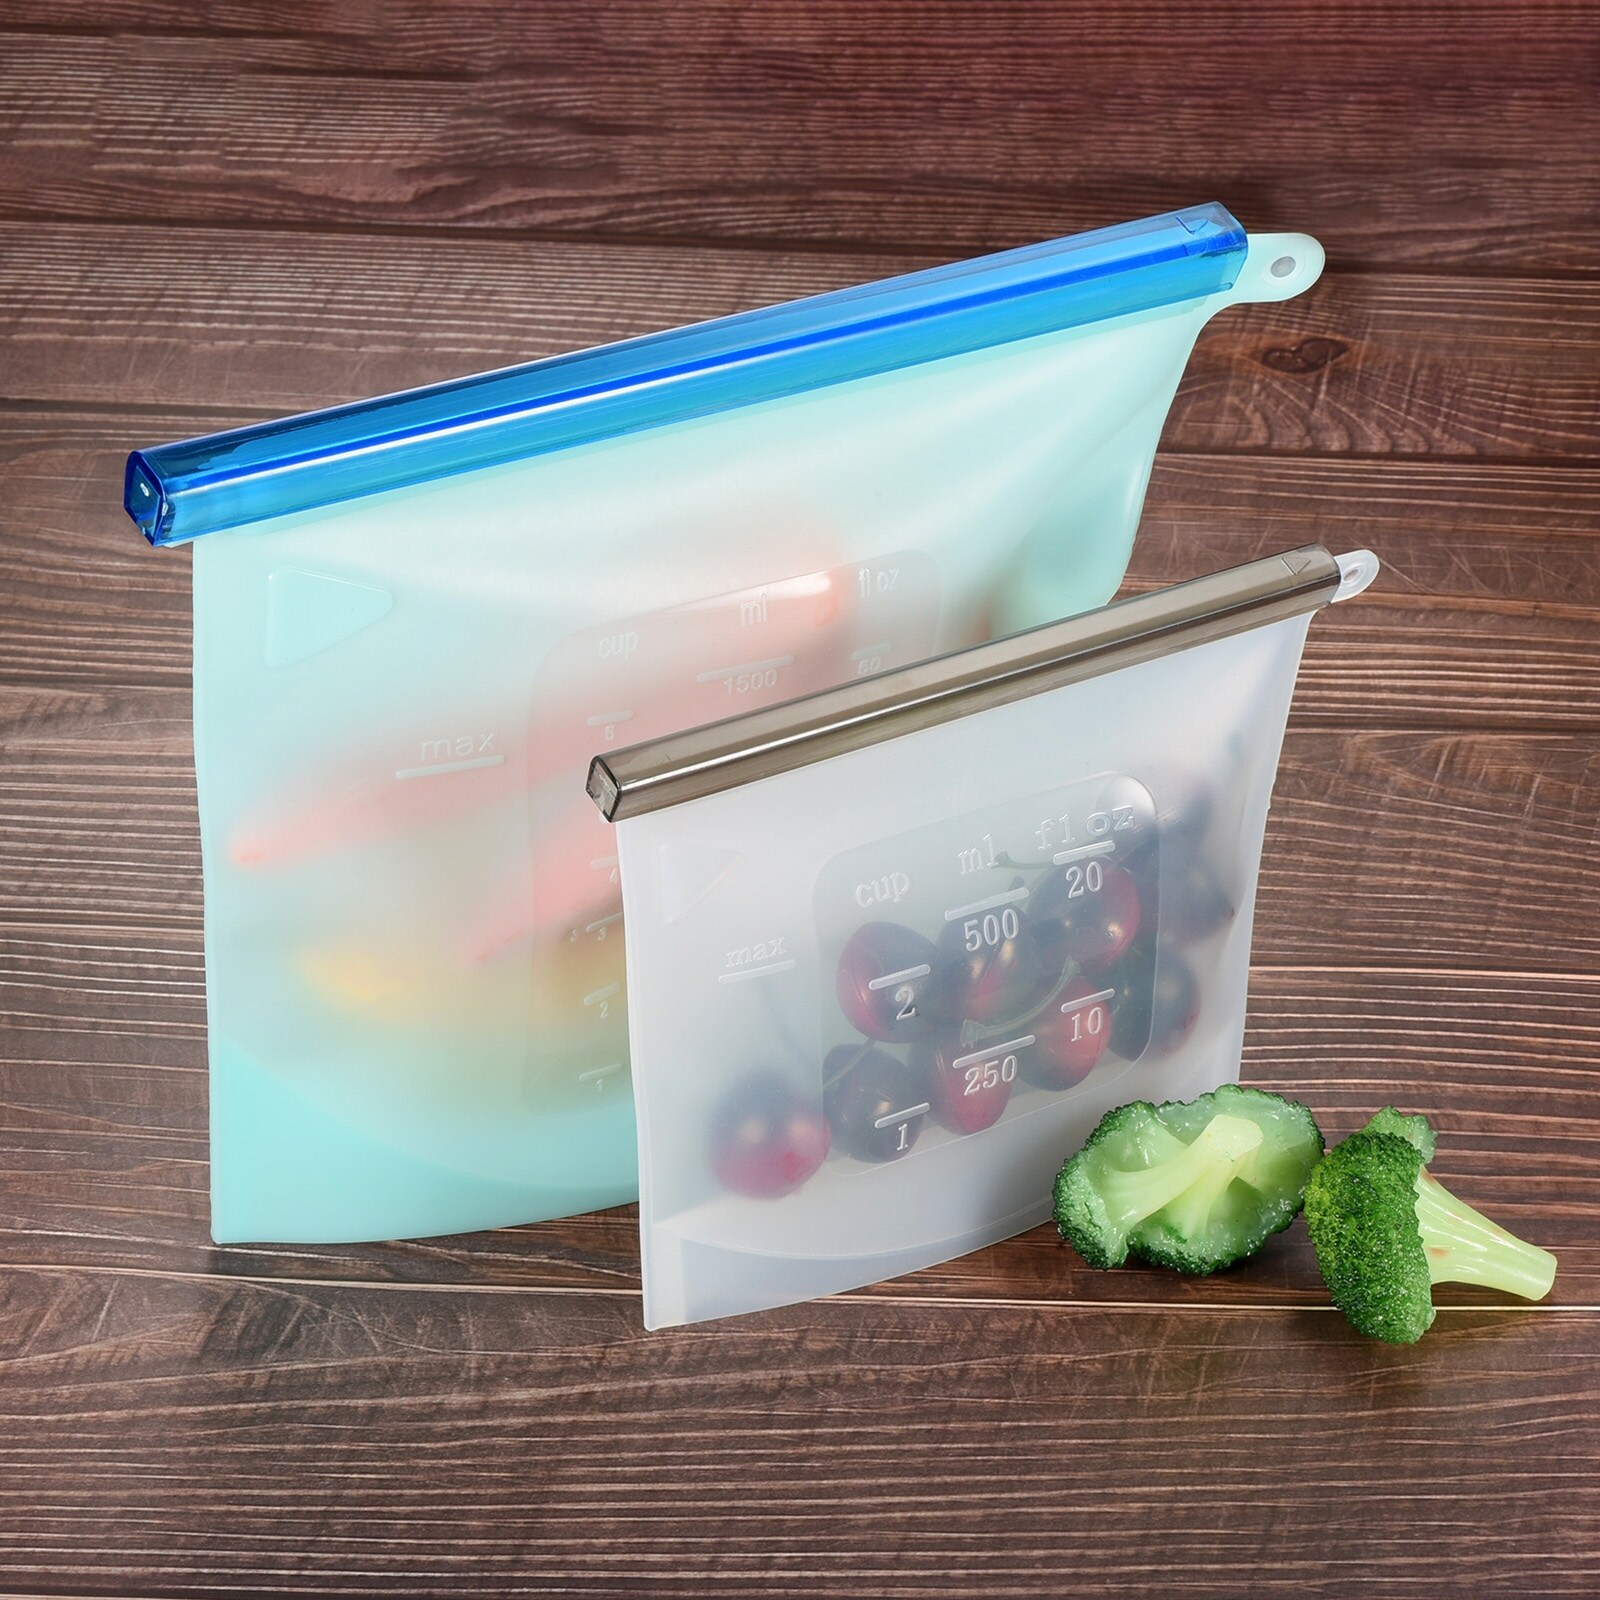 Reusable Refrigerator Food Storage Bag Silicone Fresh Bags-White+Red 6Pcs - White+Red